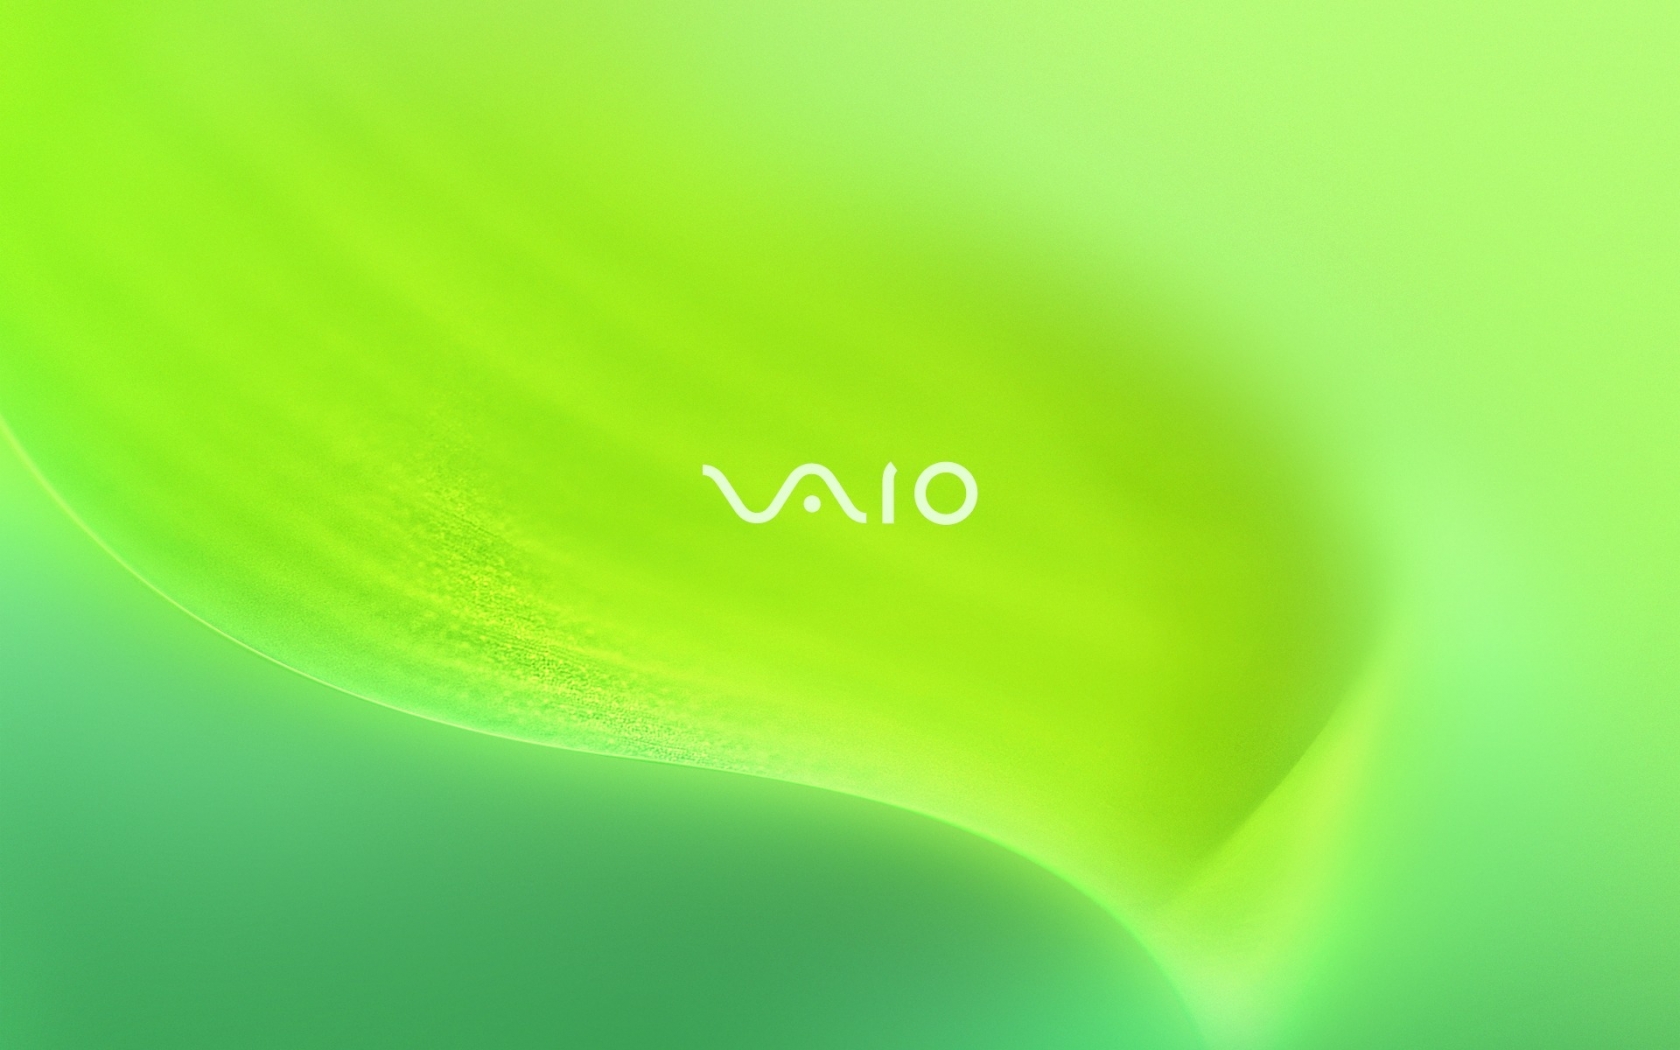 Vaio Green Leaf for 1680 x 1050 widescreen resolution